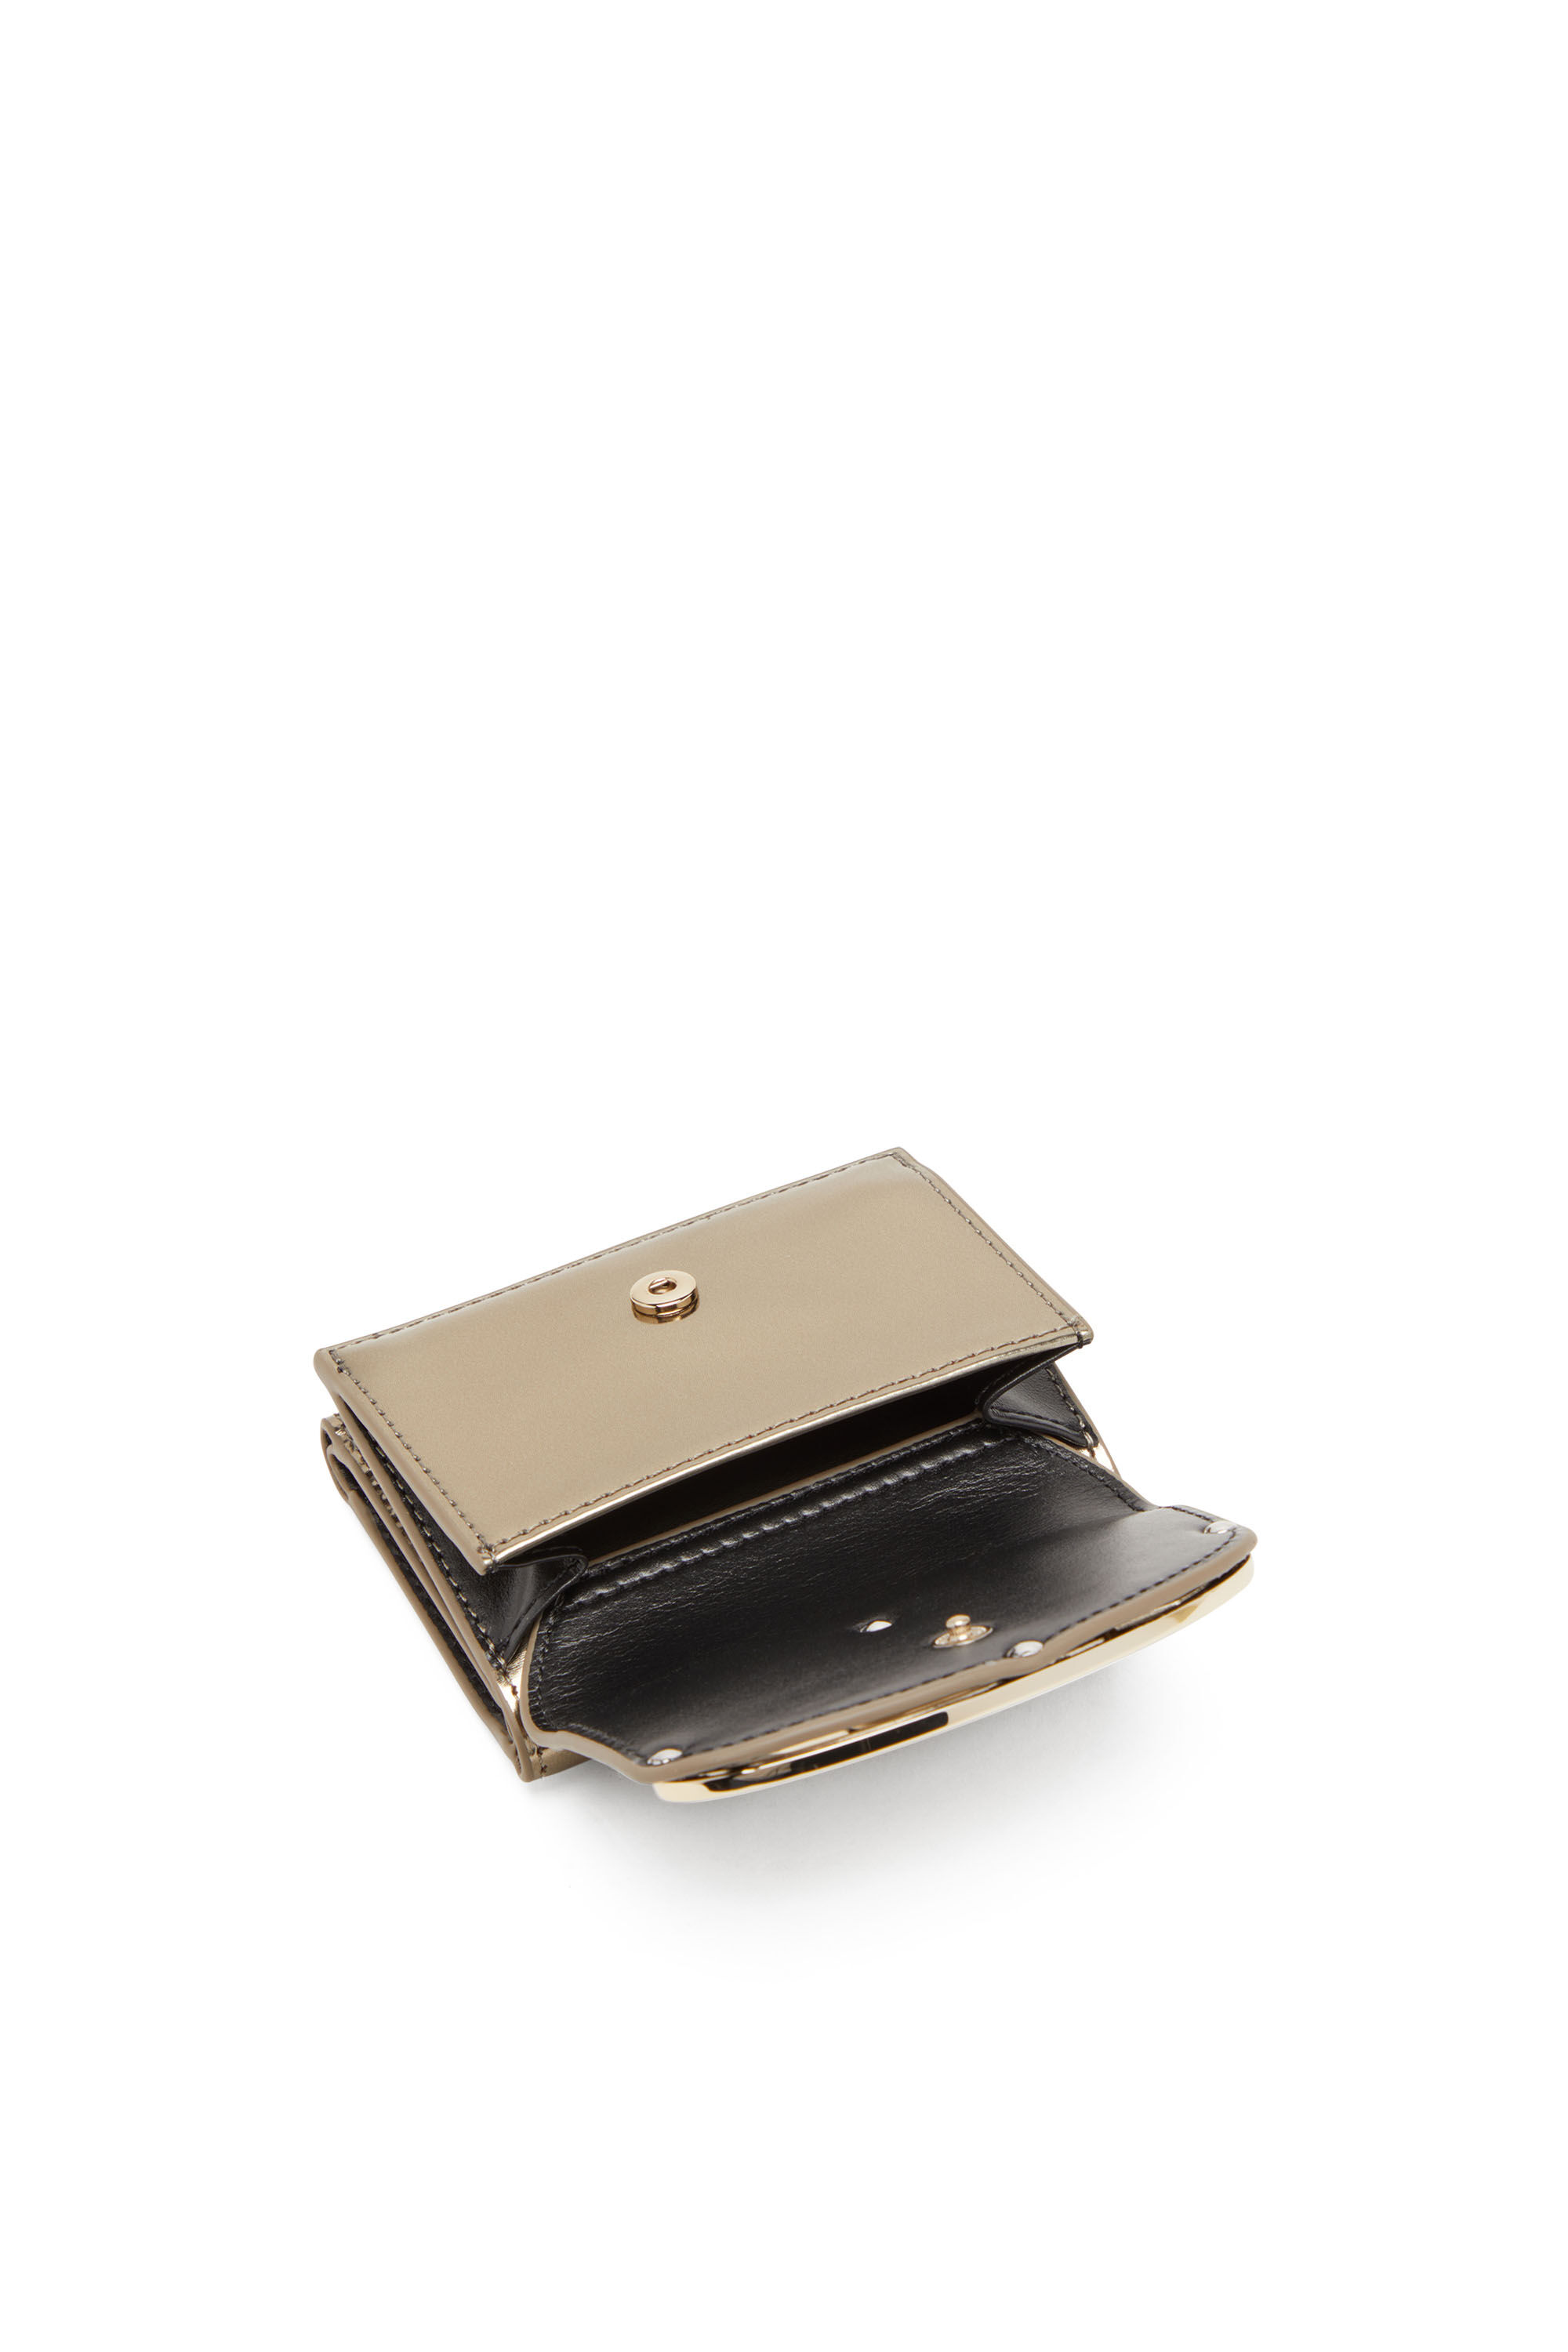 Diesel - 1DR TRI FOLD COIN XS II, Female Tri-fold wallet in mirrored leather in ブラウン - Image 4